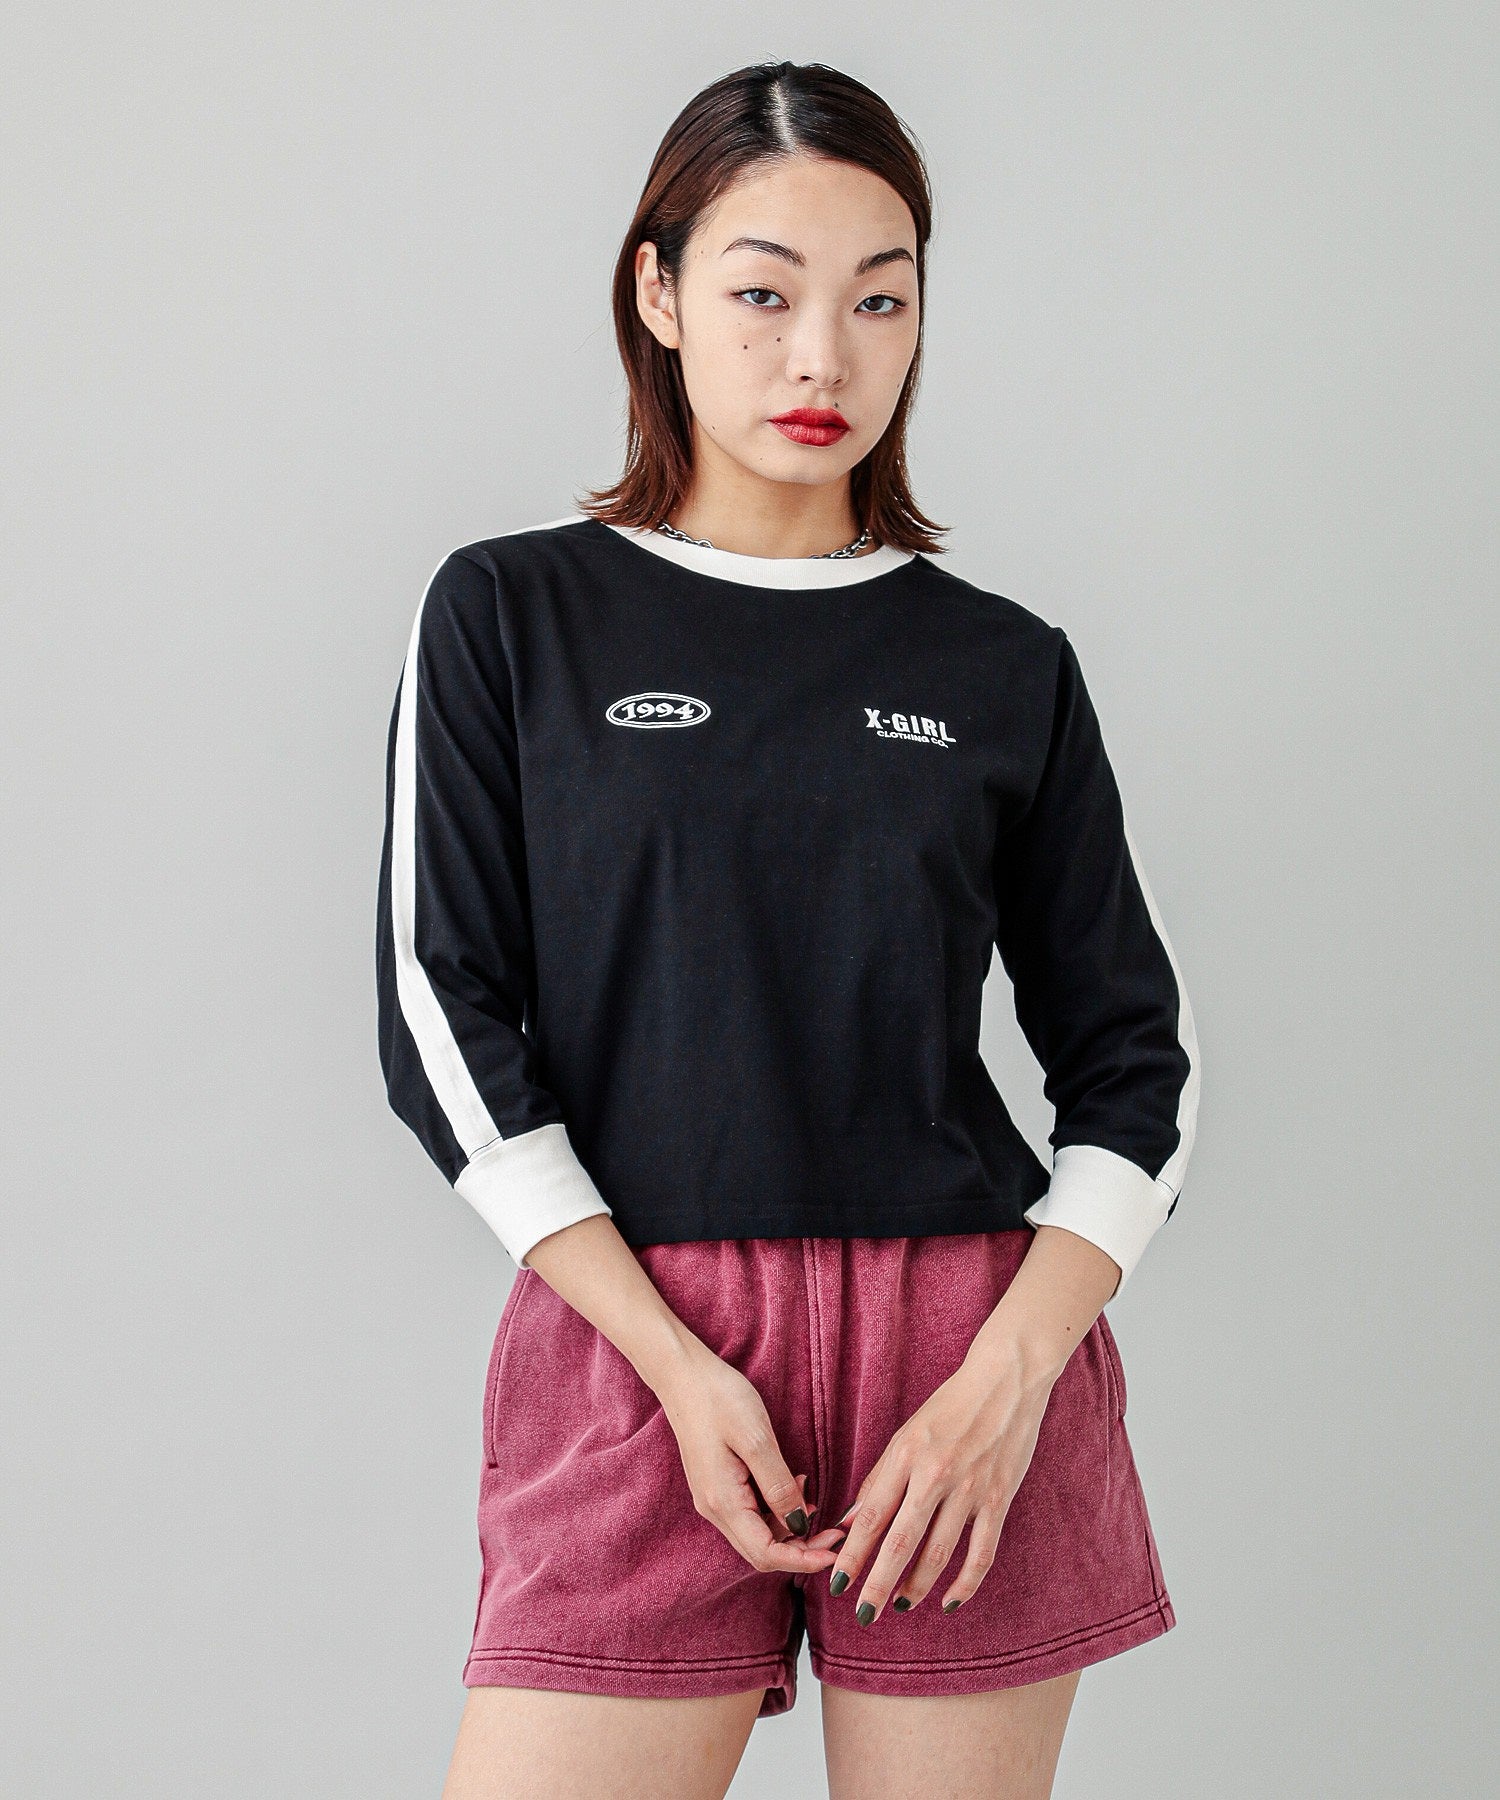 STRIPED SLEEVE COMPACT L/S TOP